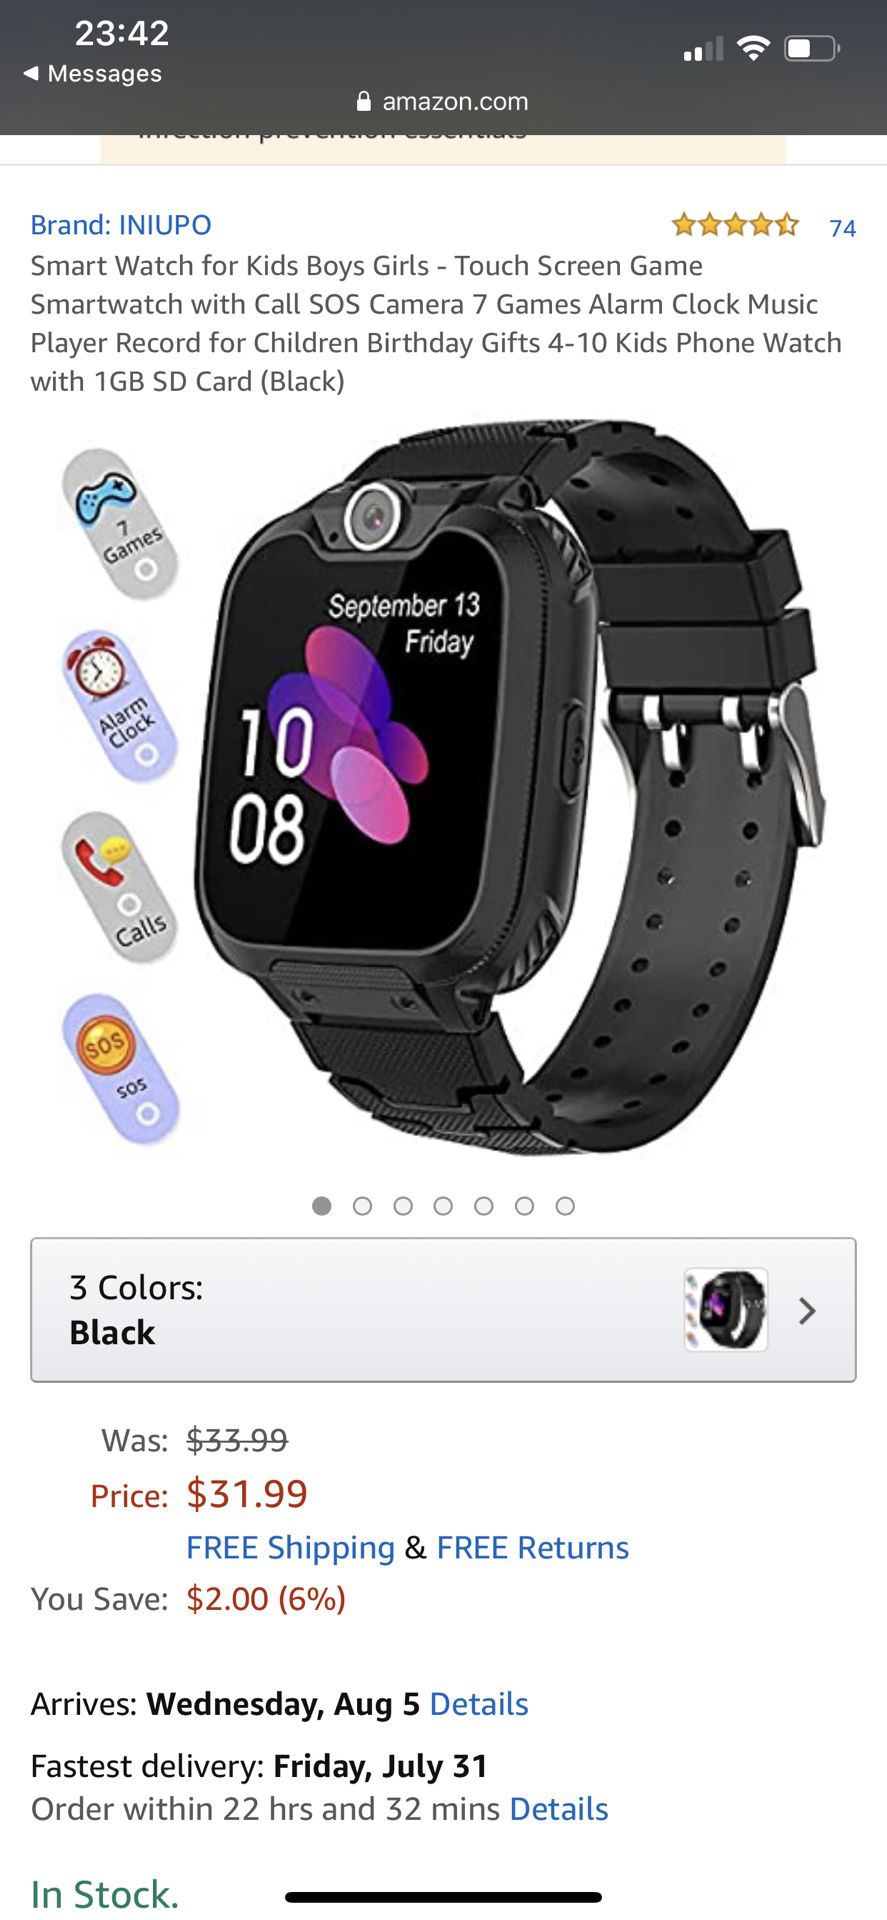 INIUPO Smart Watch For Kids In Black